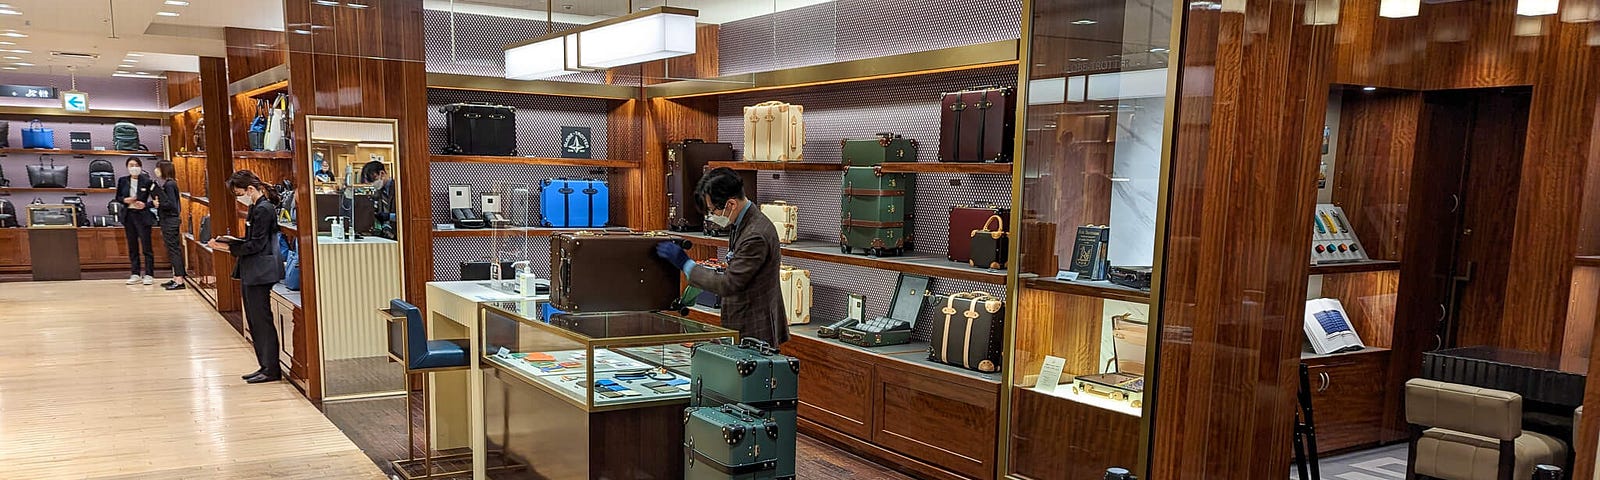 Upscale department store with gloved salesperson selling leather suitcases. If you have to ask the price, you can’t afford it, dear